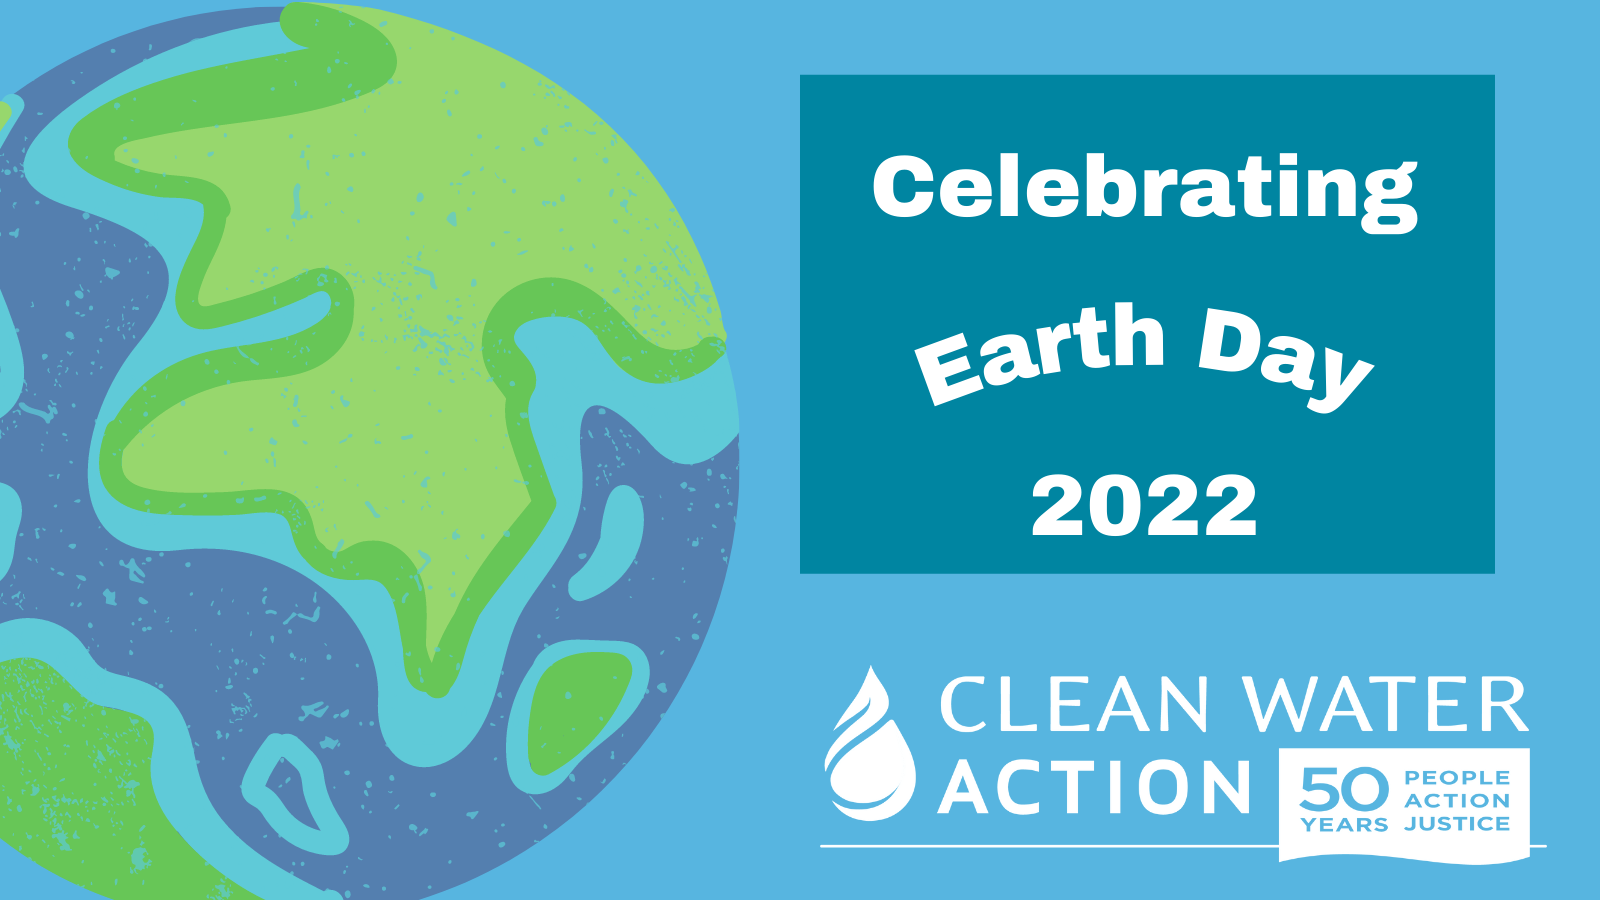 Celebrating Earth Day 2022